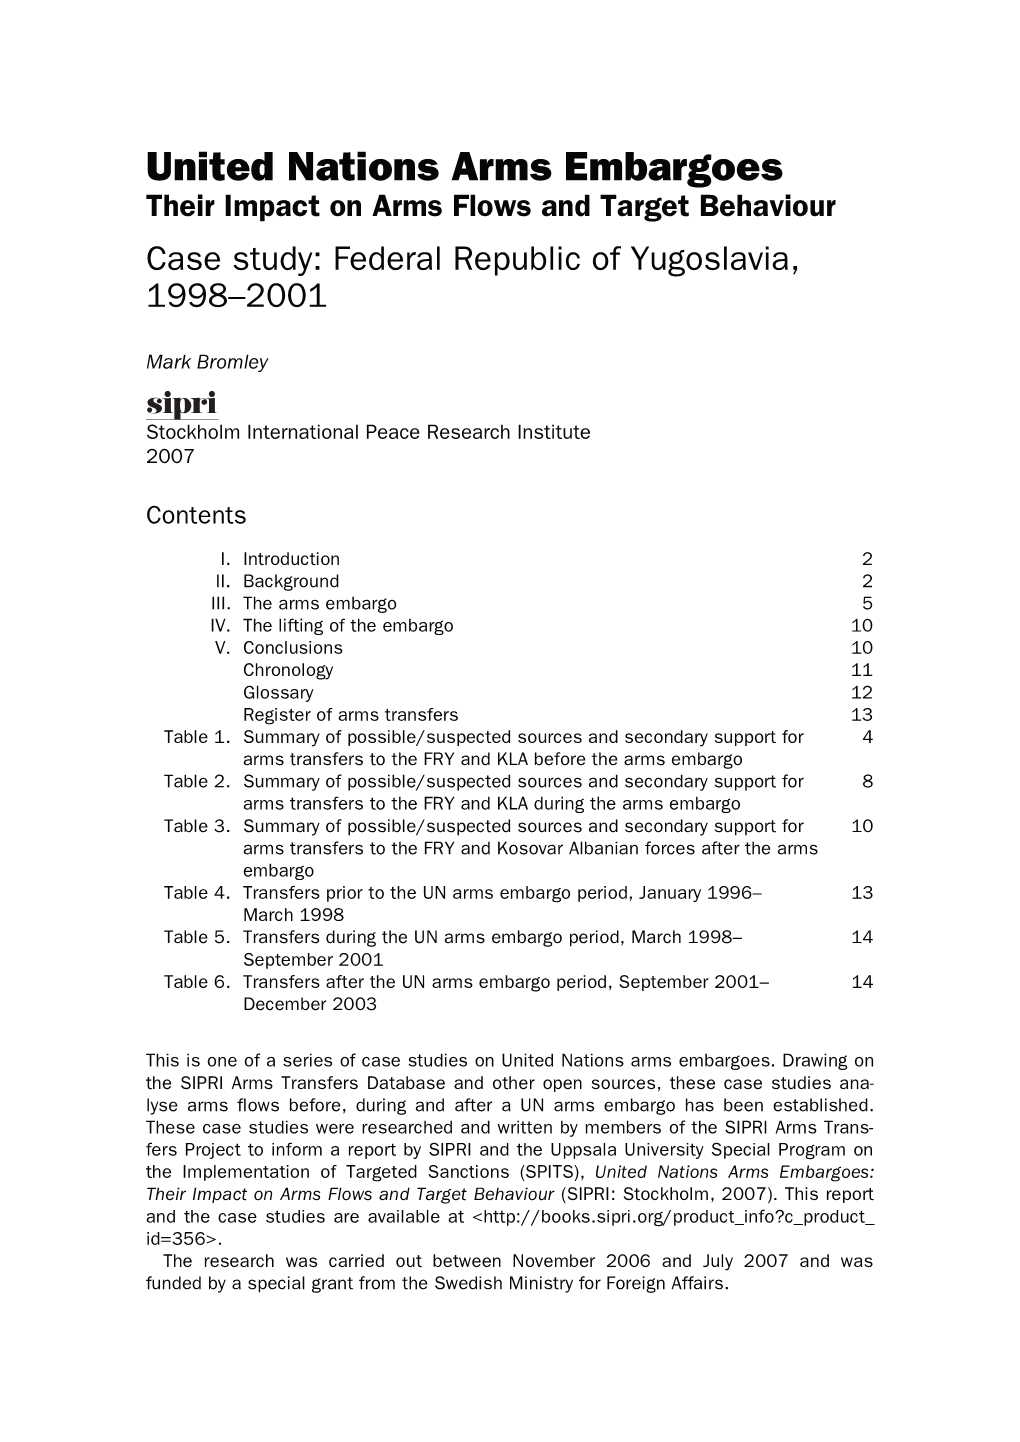 United Nations Arms Embargoes Their Impact on Arms Flows and Target Behaviour Case Study: Federal Republic of Yugoslavia, 1998–2001